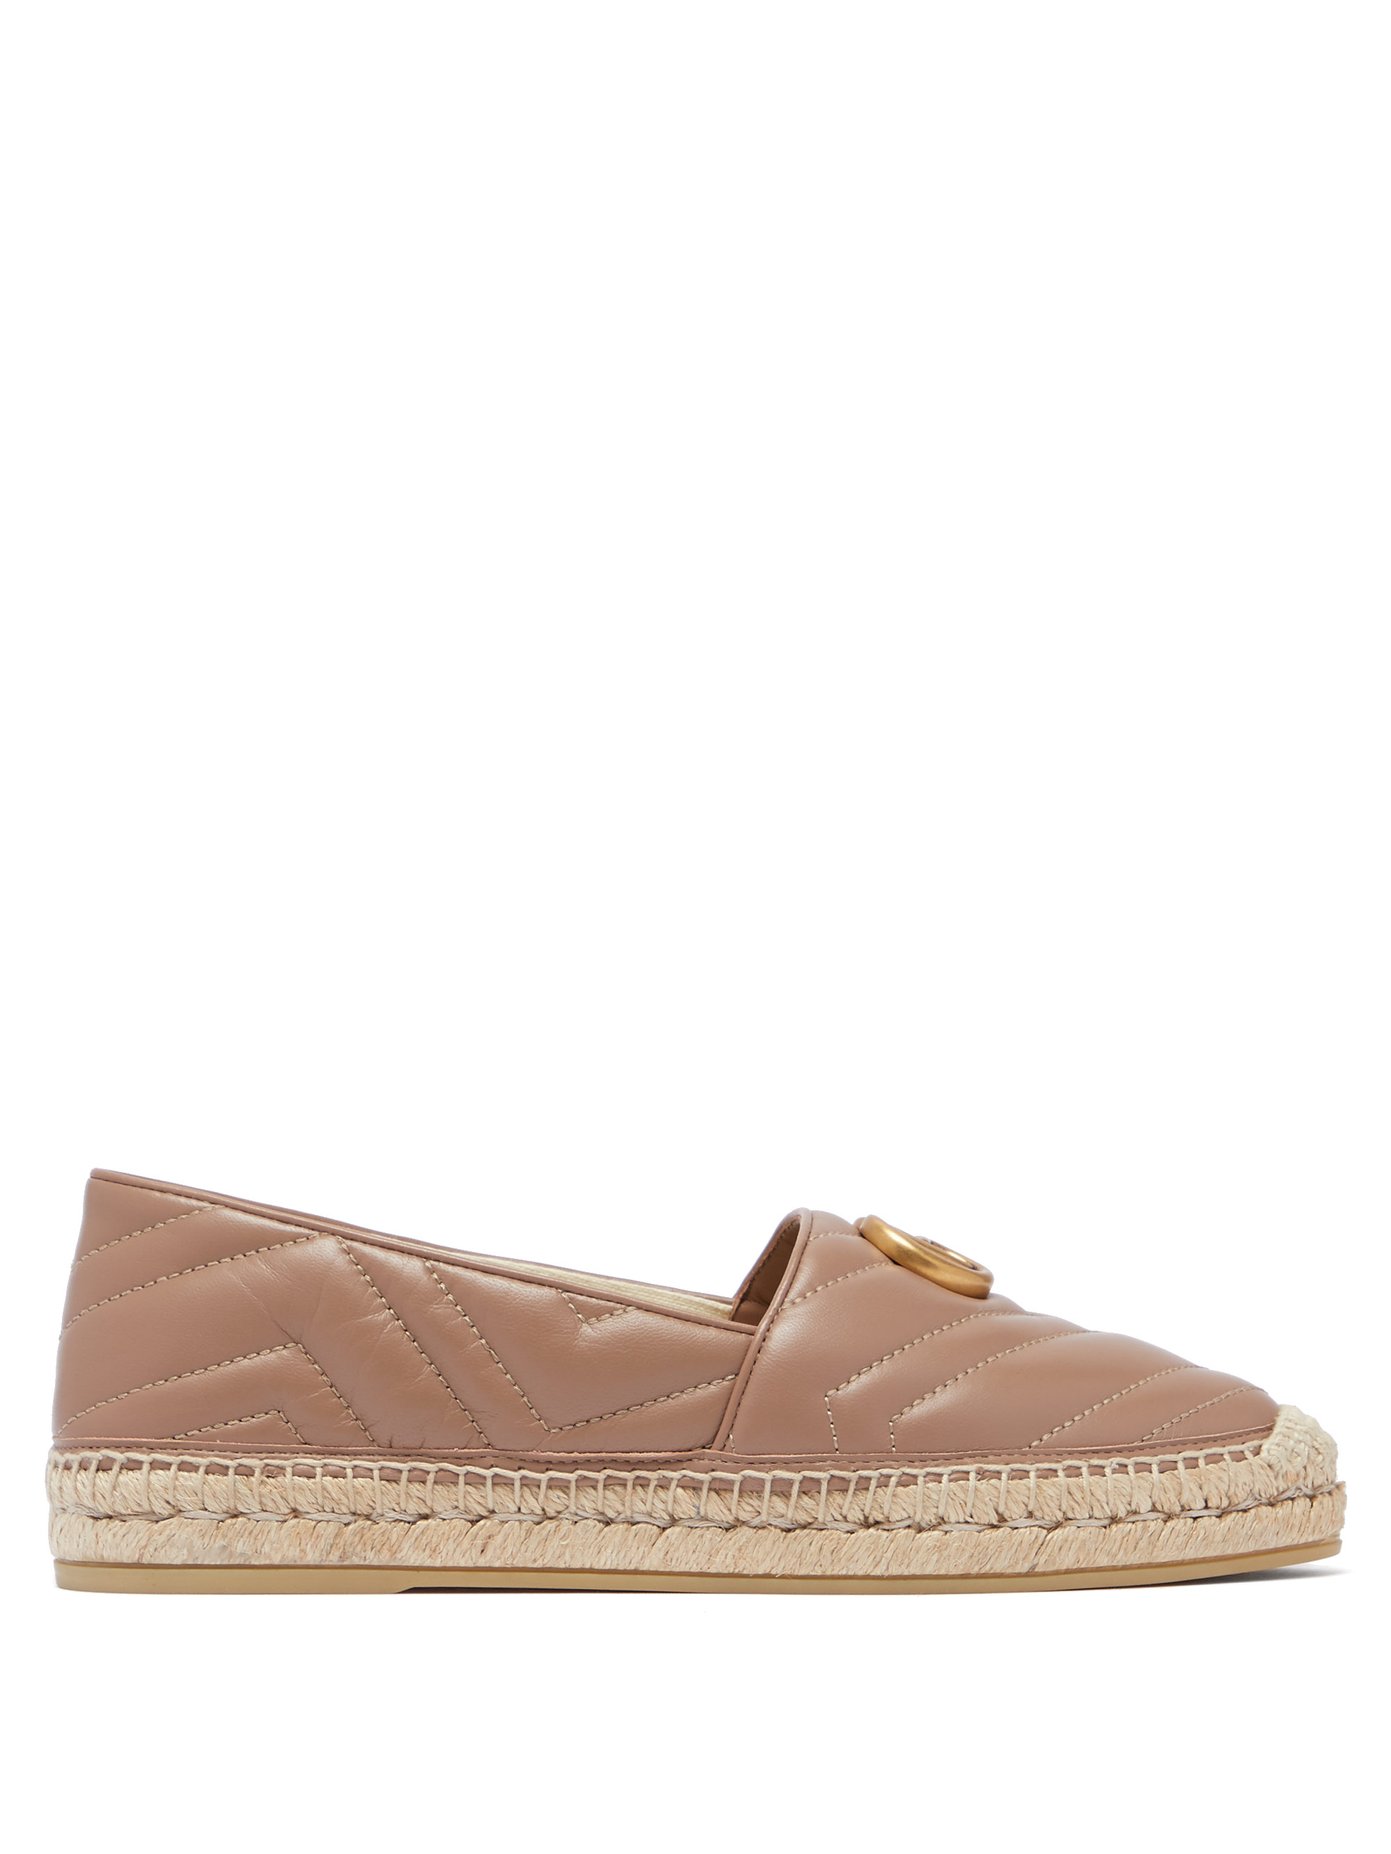 Pilar GG quilted-leather espadrilles 